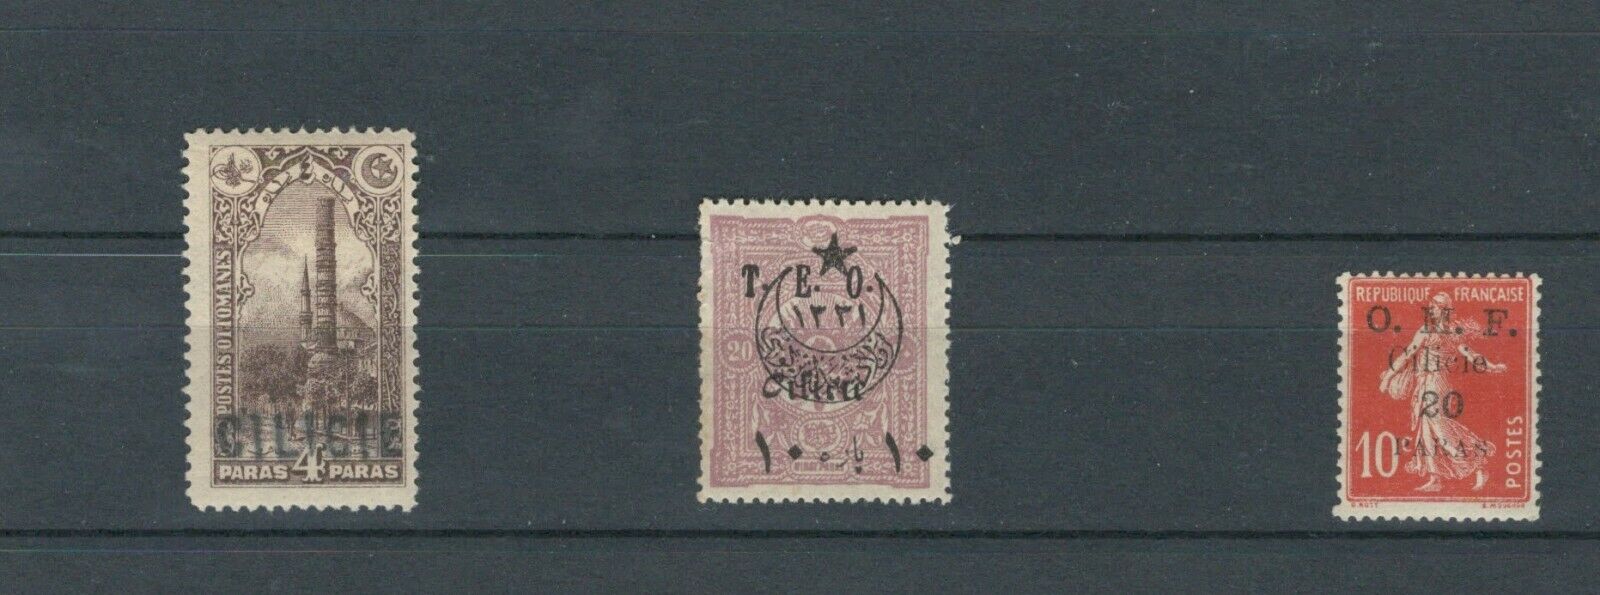 Cilicia Cilicie Ottoman Empire French Colonies Postal Mh Stamps Lot (turkey 676)